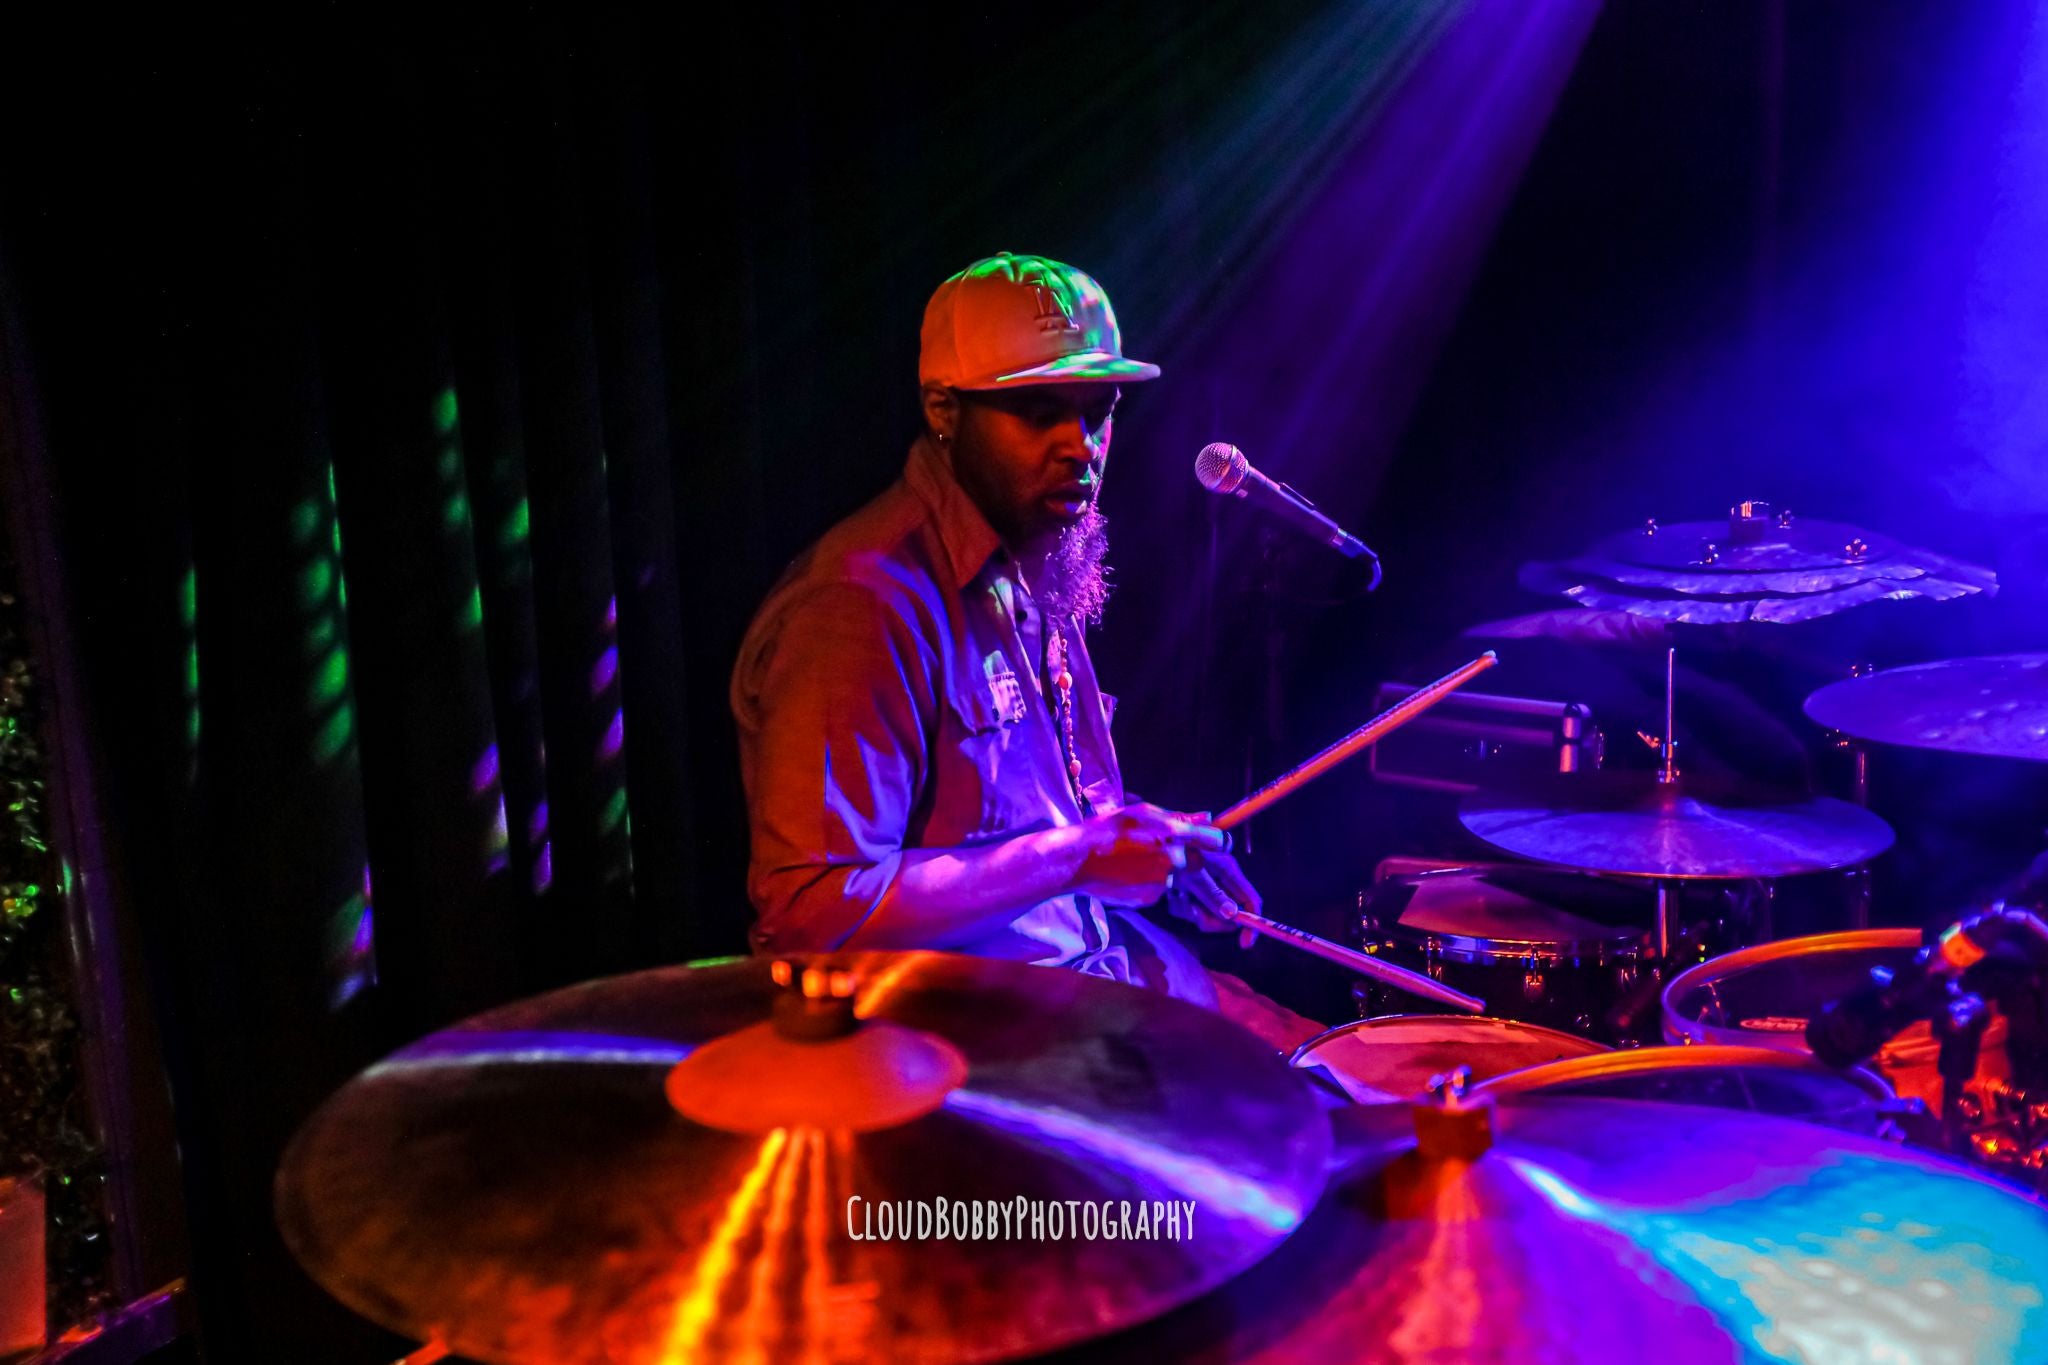 Iajhi Hampden making a solid stank face as he shreds his drums on a colorfully lit indoor stage. 